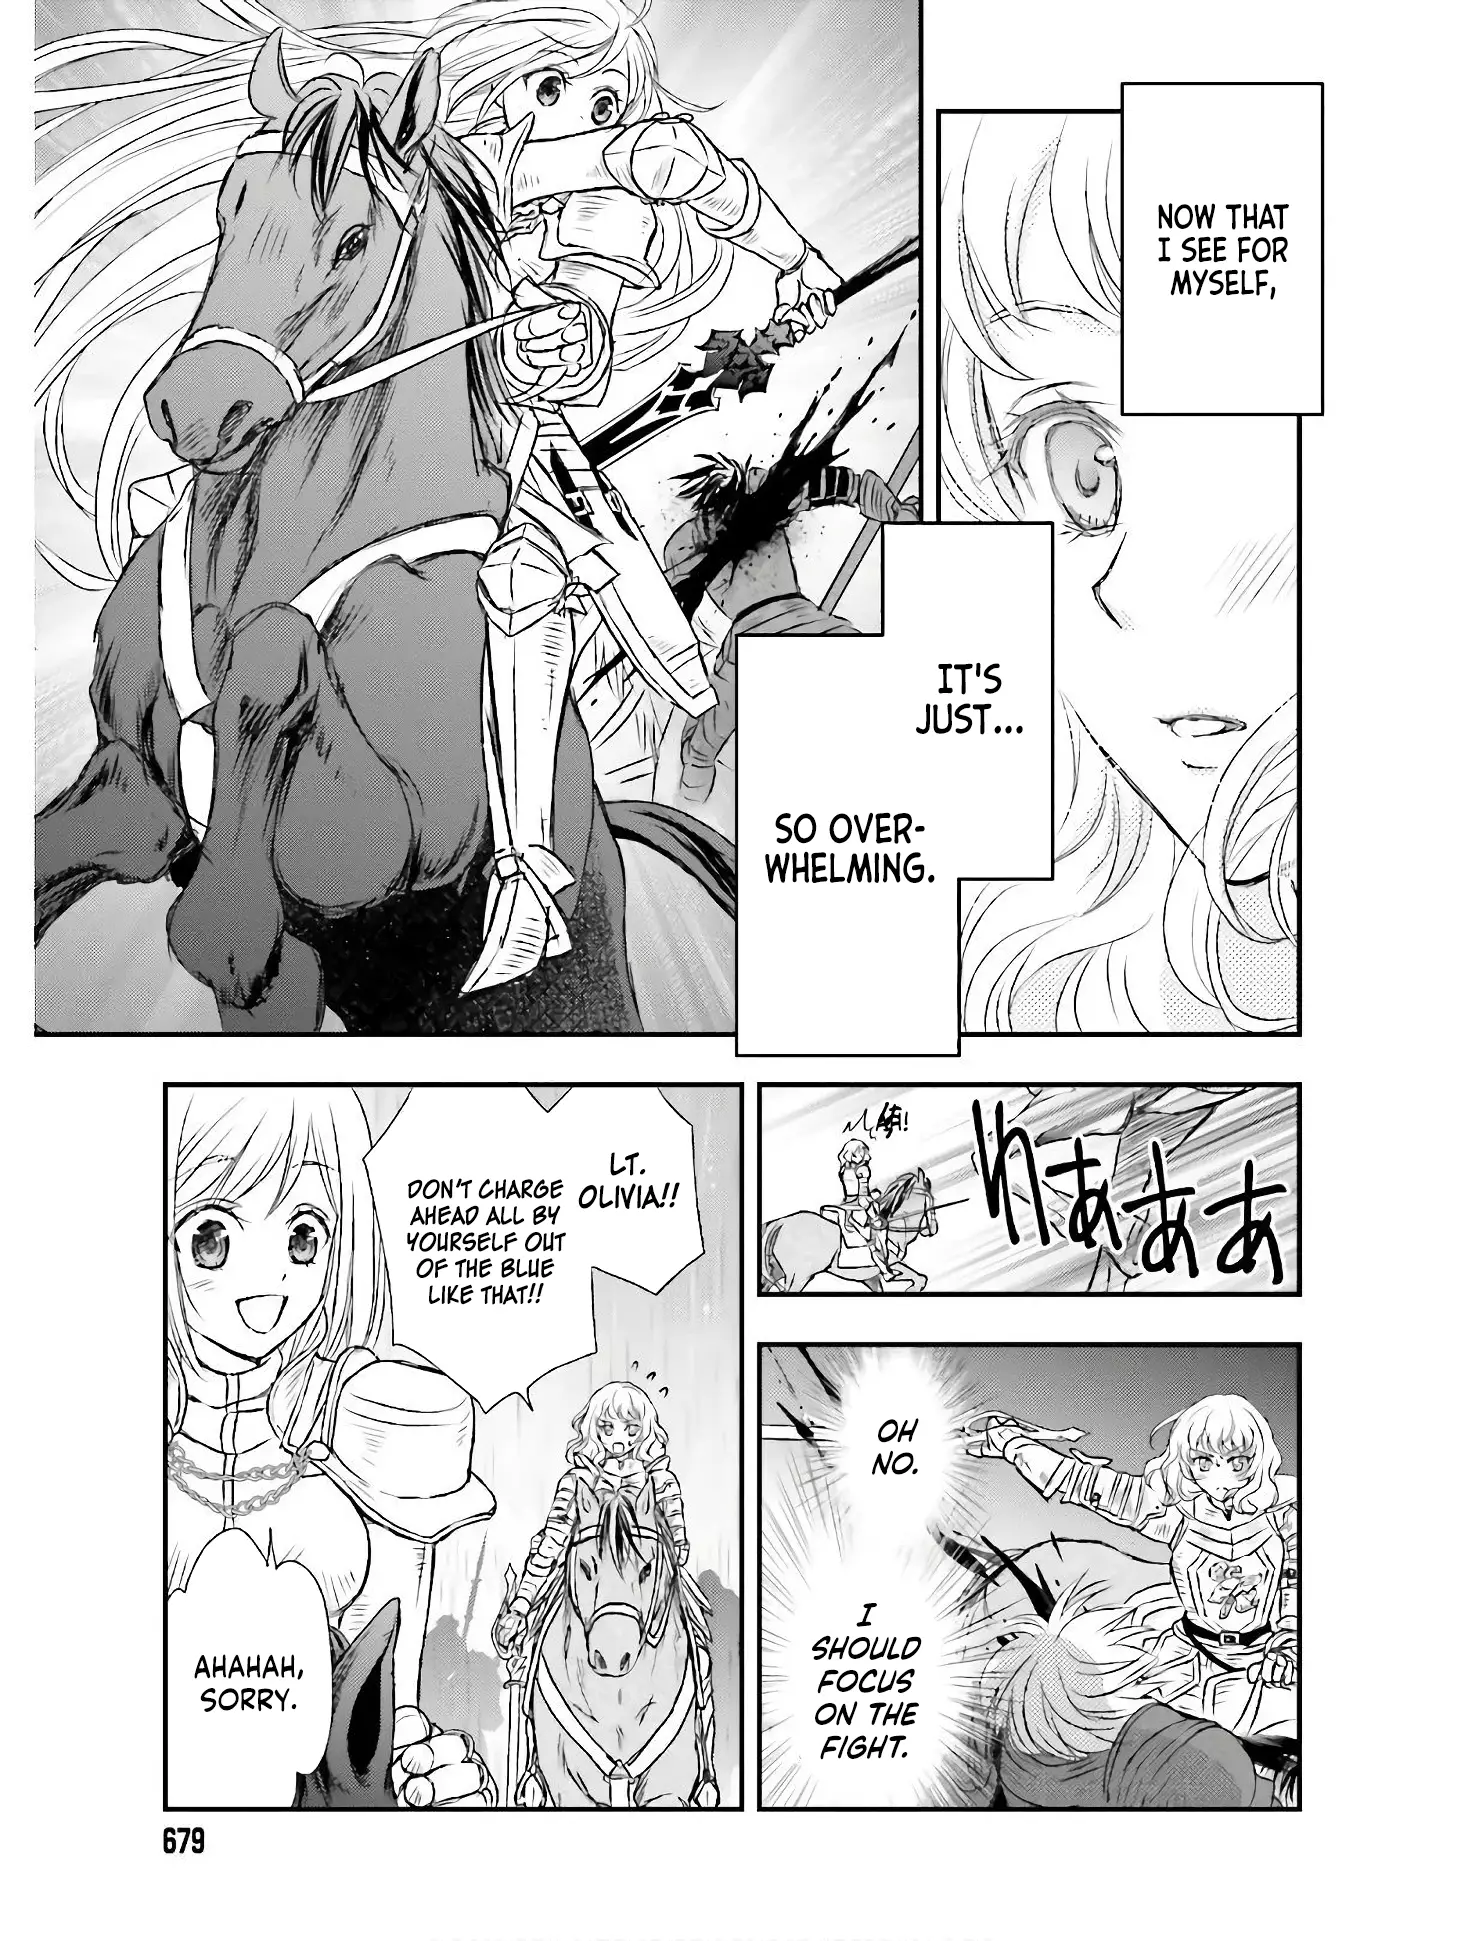 The Little Girl Raised By Death Hold The Sword Of Death Tight - 9 page 23